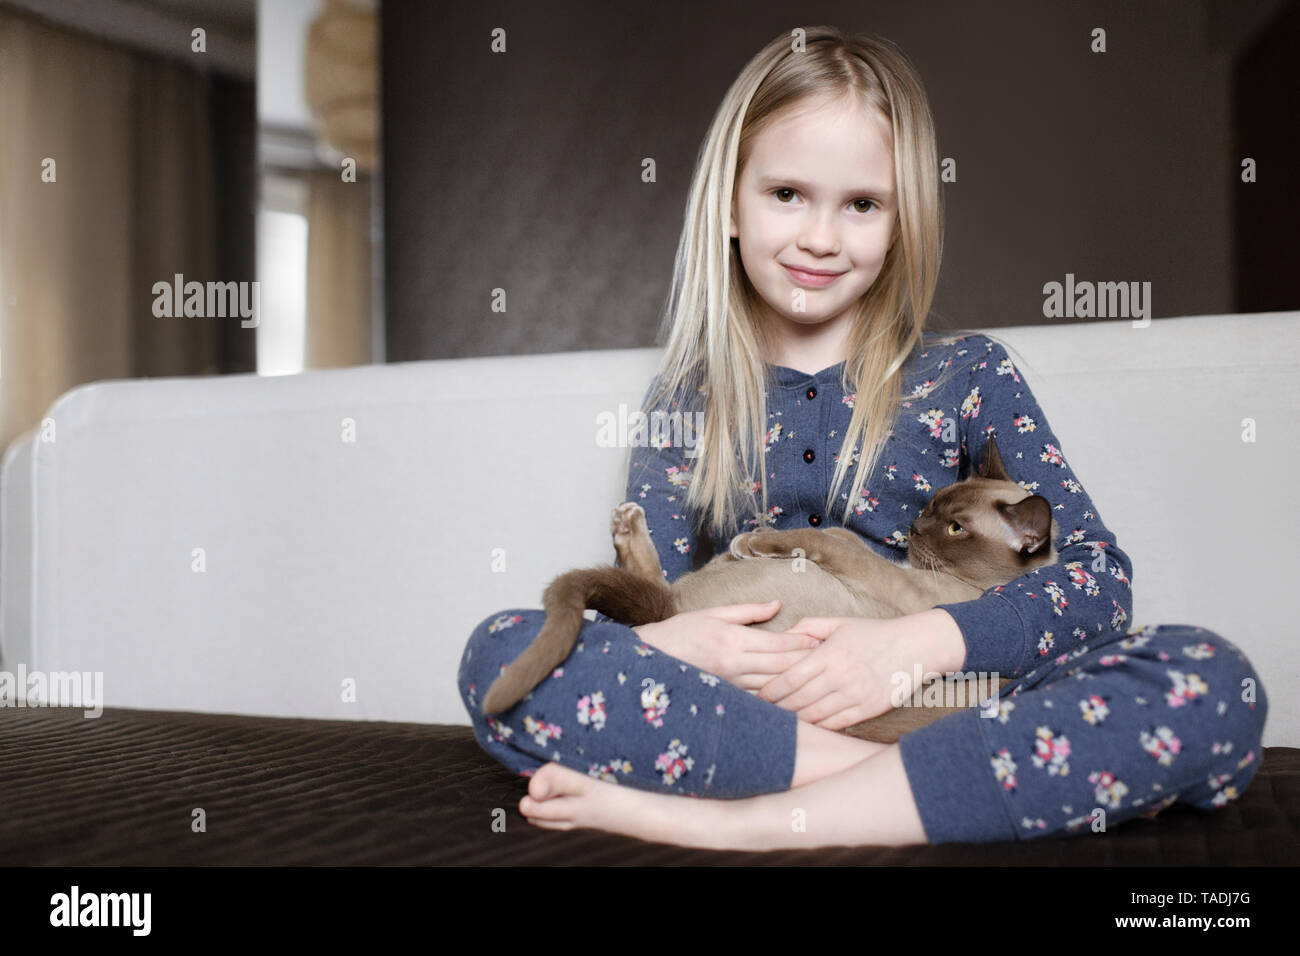 Portrait of smiling little girl wearing pyjama with floral design holding cat in her arms Stock Photo